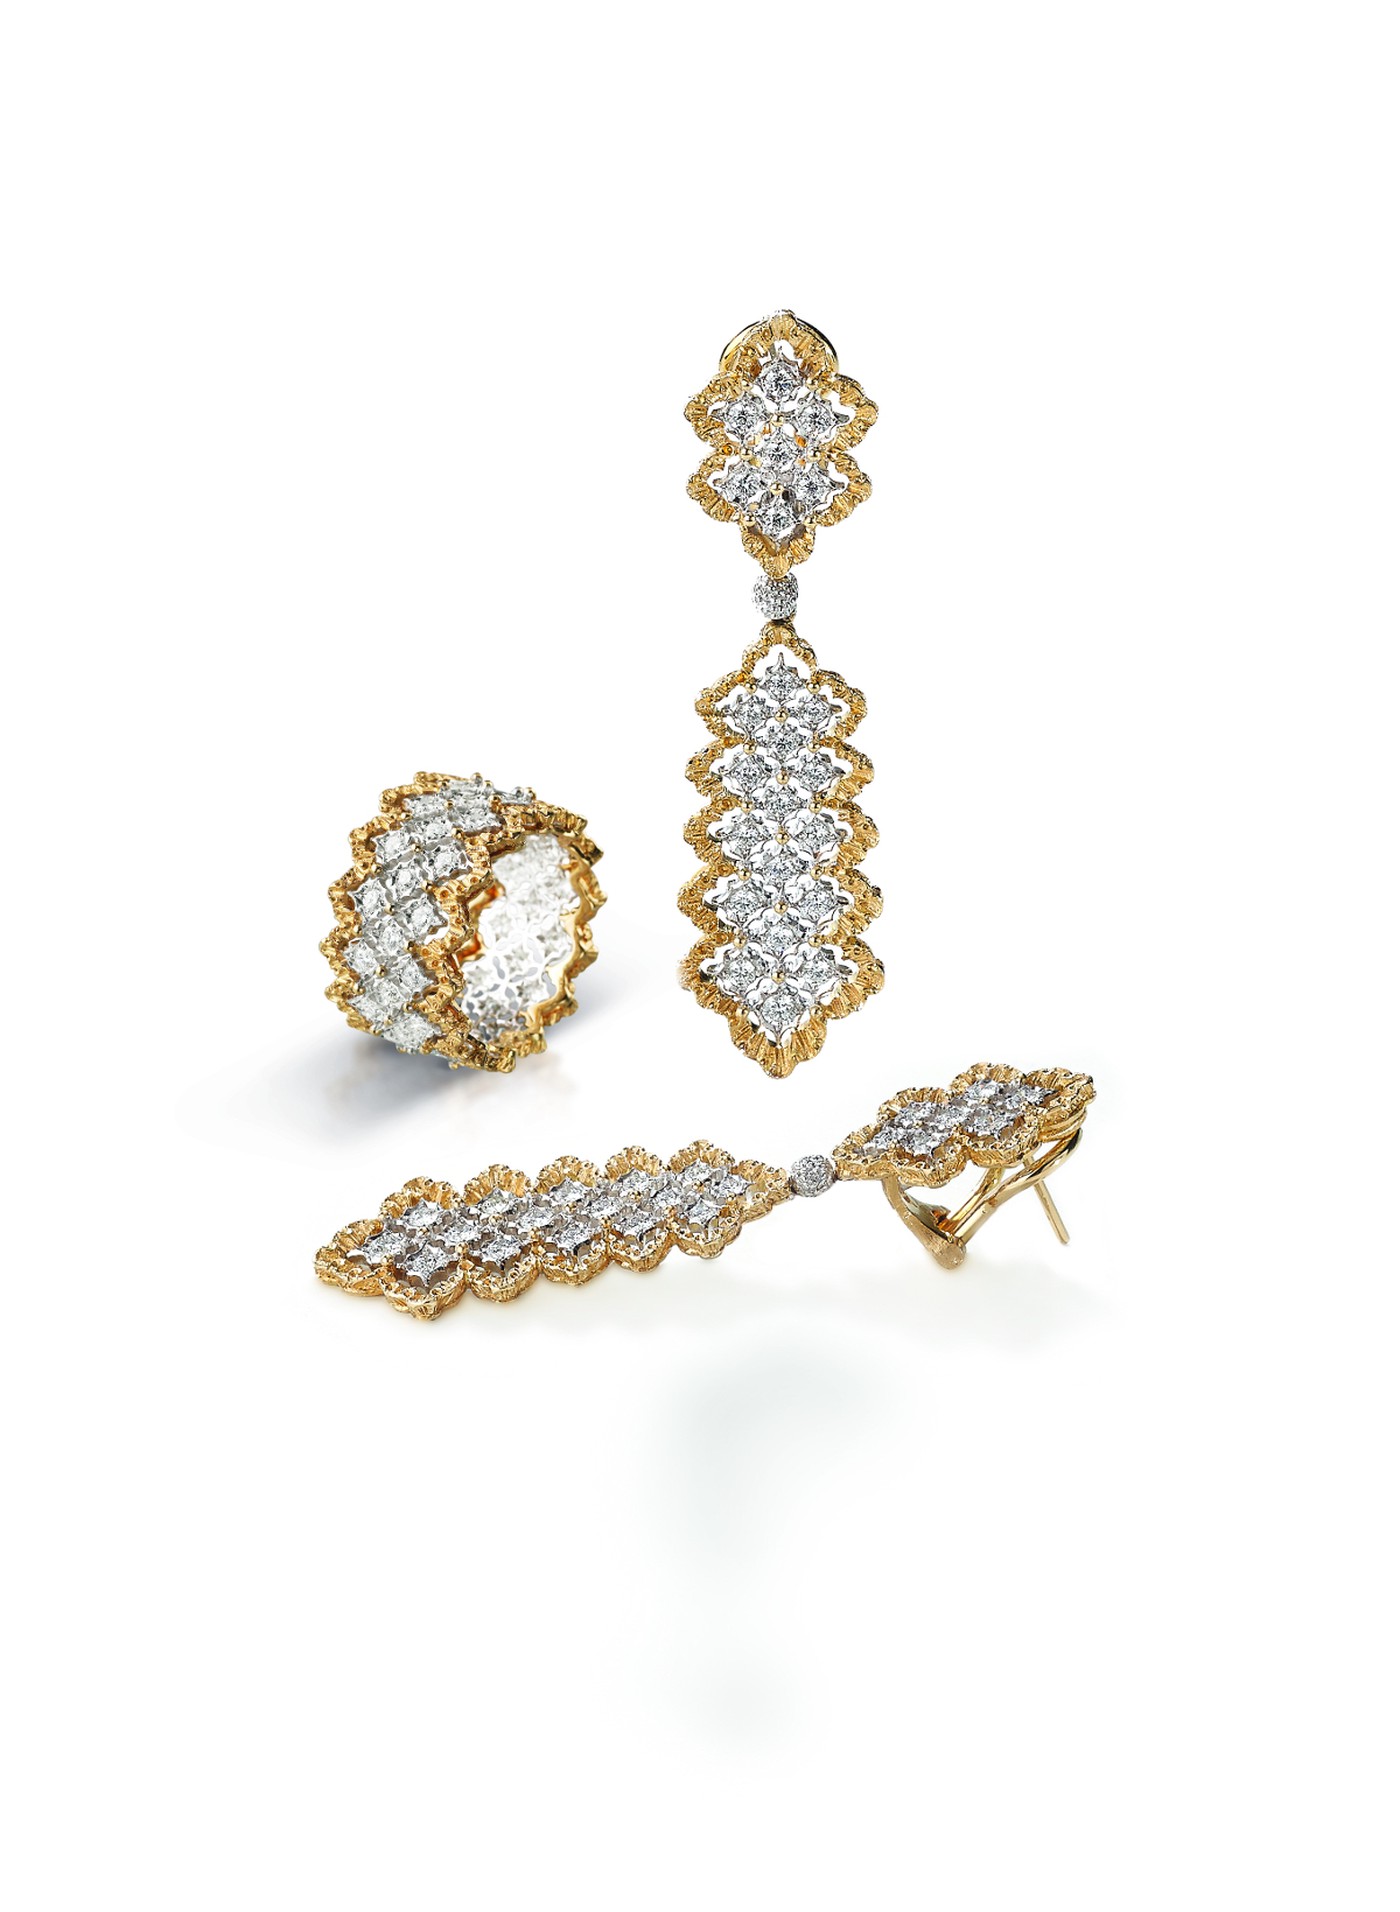 Rombi Pendant earrings and matching ring in white gold set with diamonds, with scalloped yellow gold borders